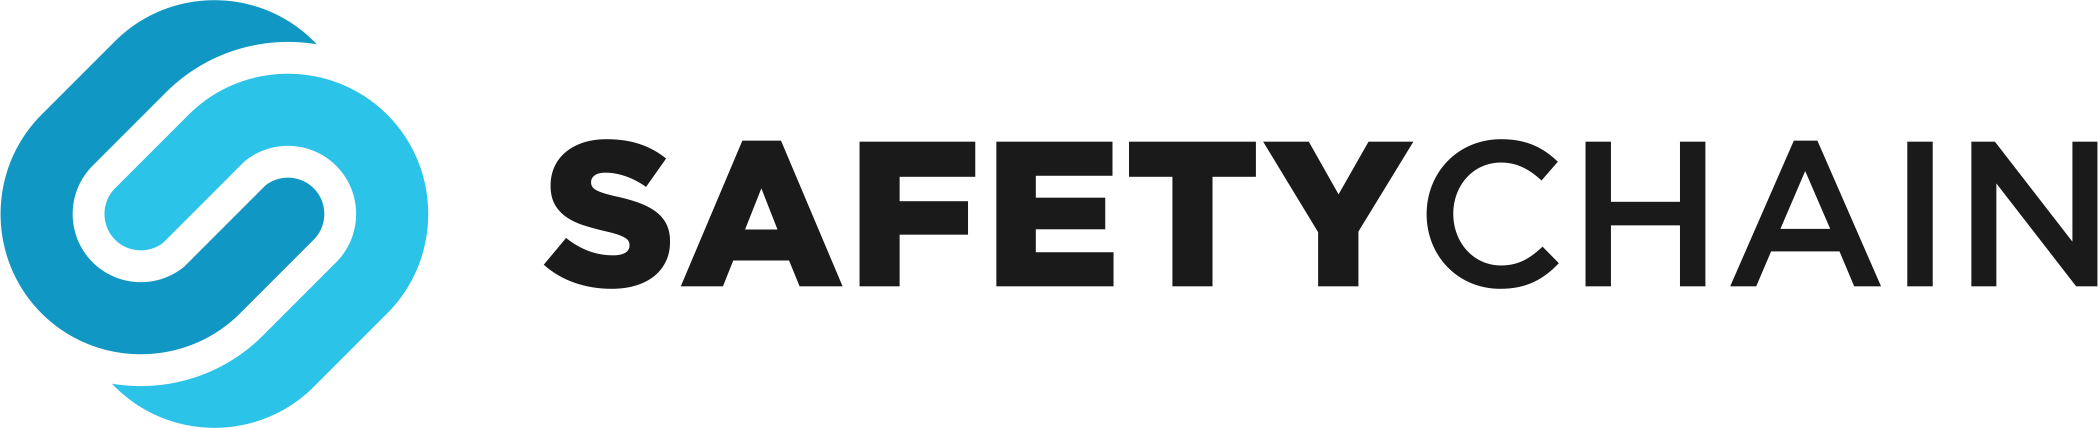 SafetyChain-primary-logo.png